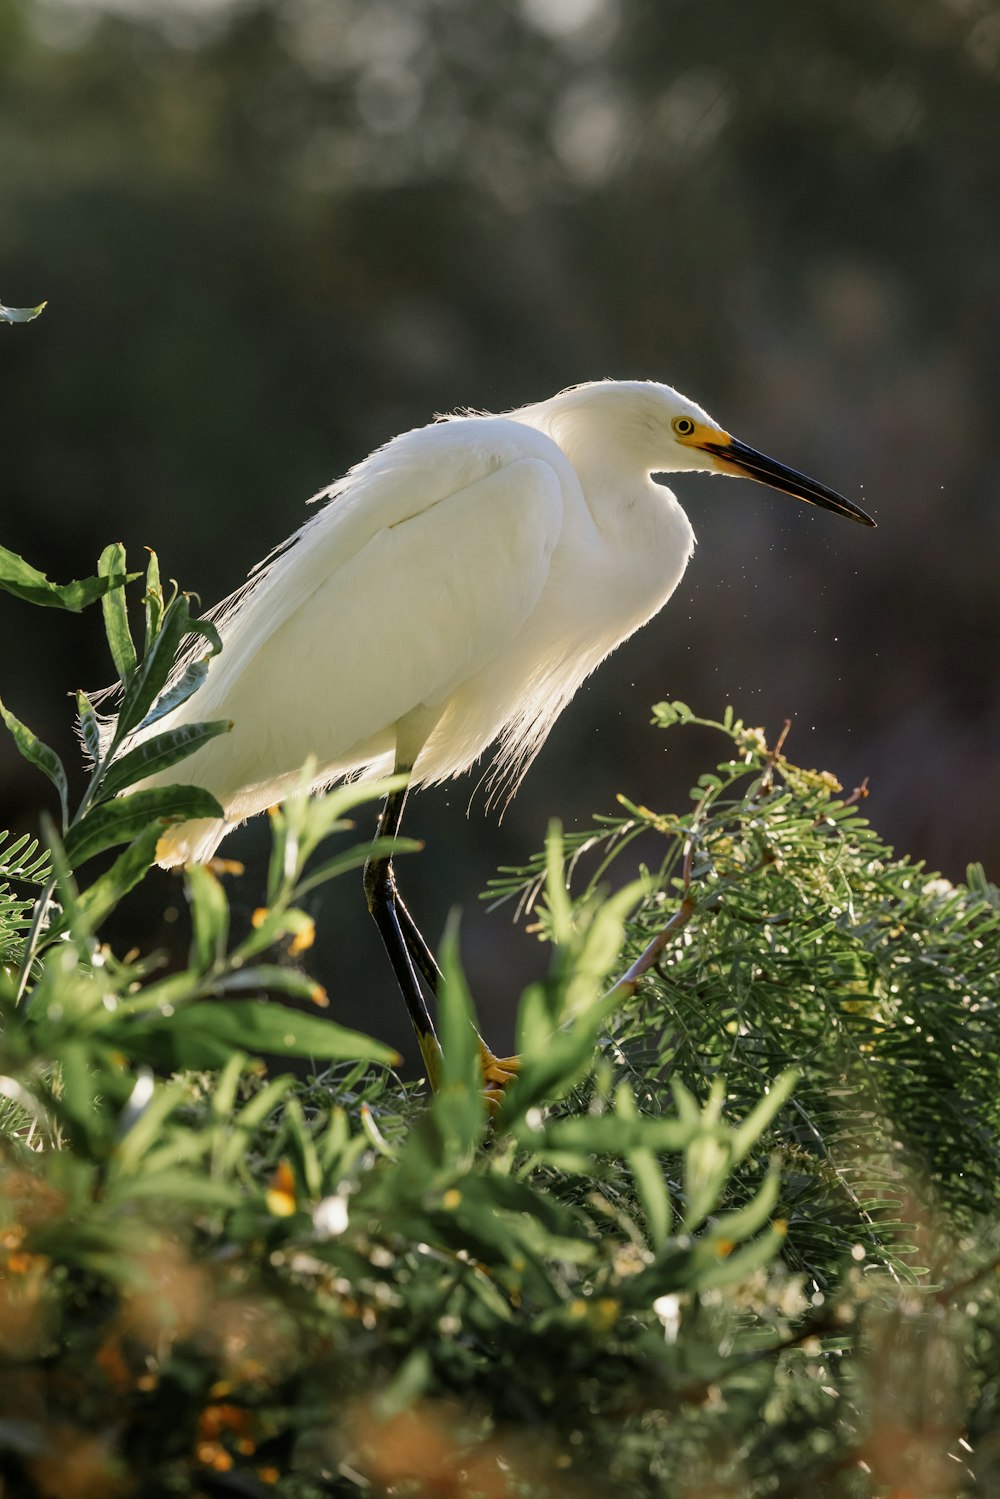 white egret perched on green plant during daytime